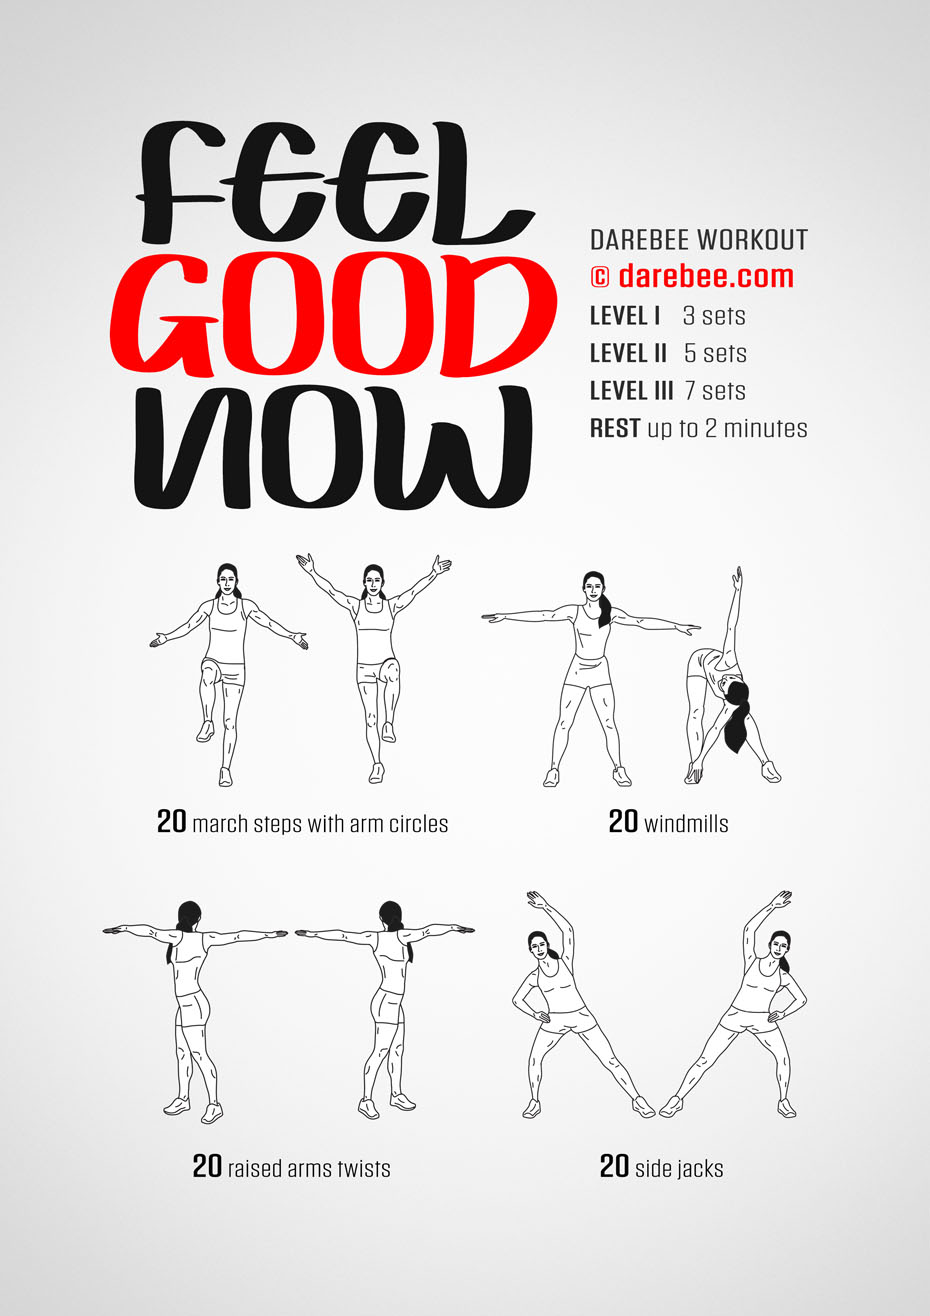 Feel Good Now is a DAREBEE no-equipment, home fitness workout that will leave you feeling refreshed and re-energized after you have finished it.